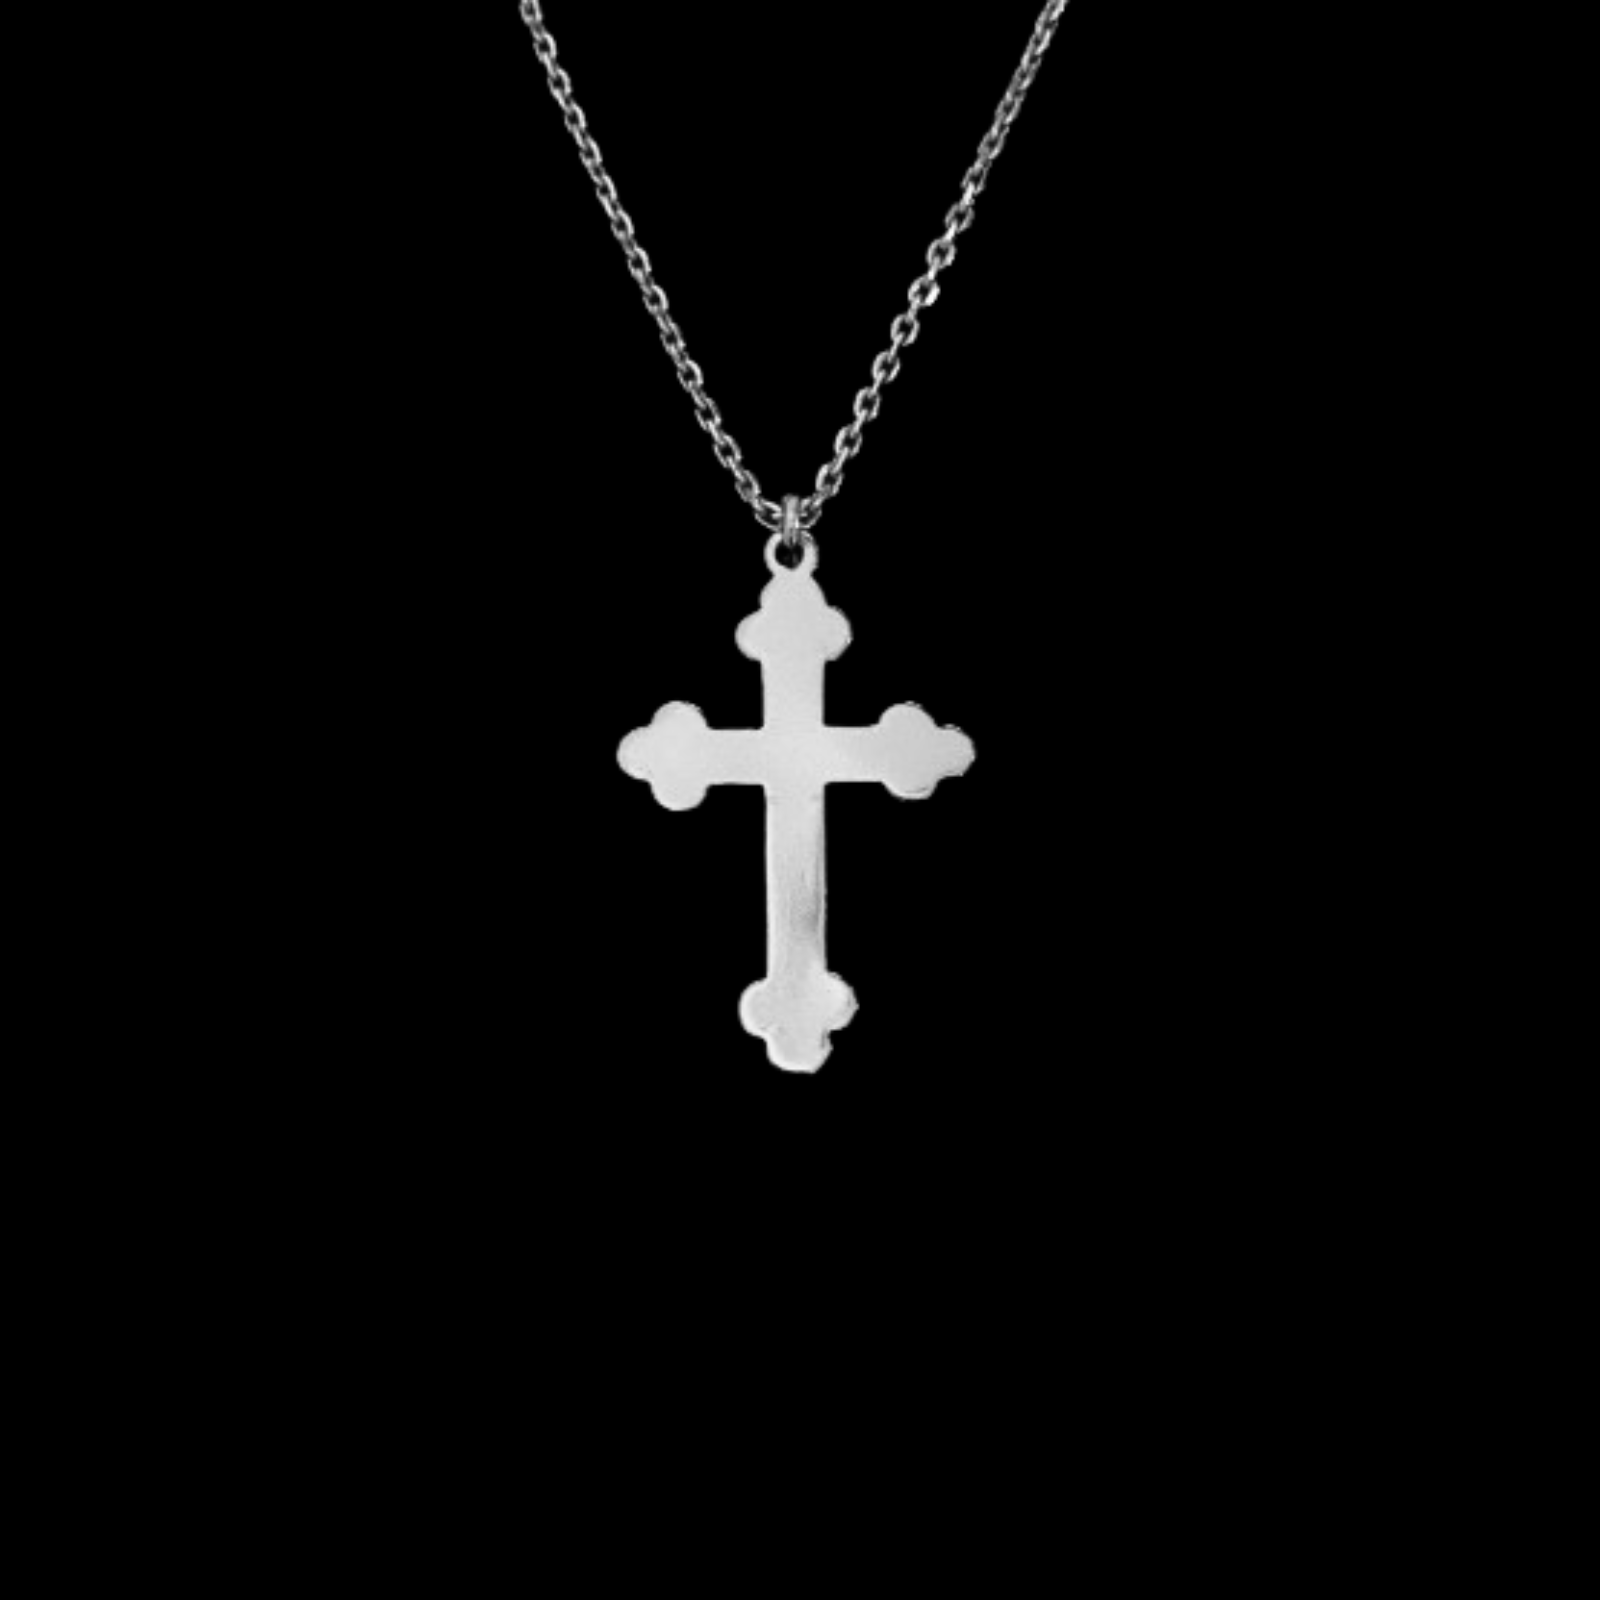 Hand Crafted Sterling Silver Cross Pendant with Hammered Finish -  thegoldsmith